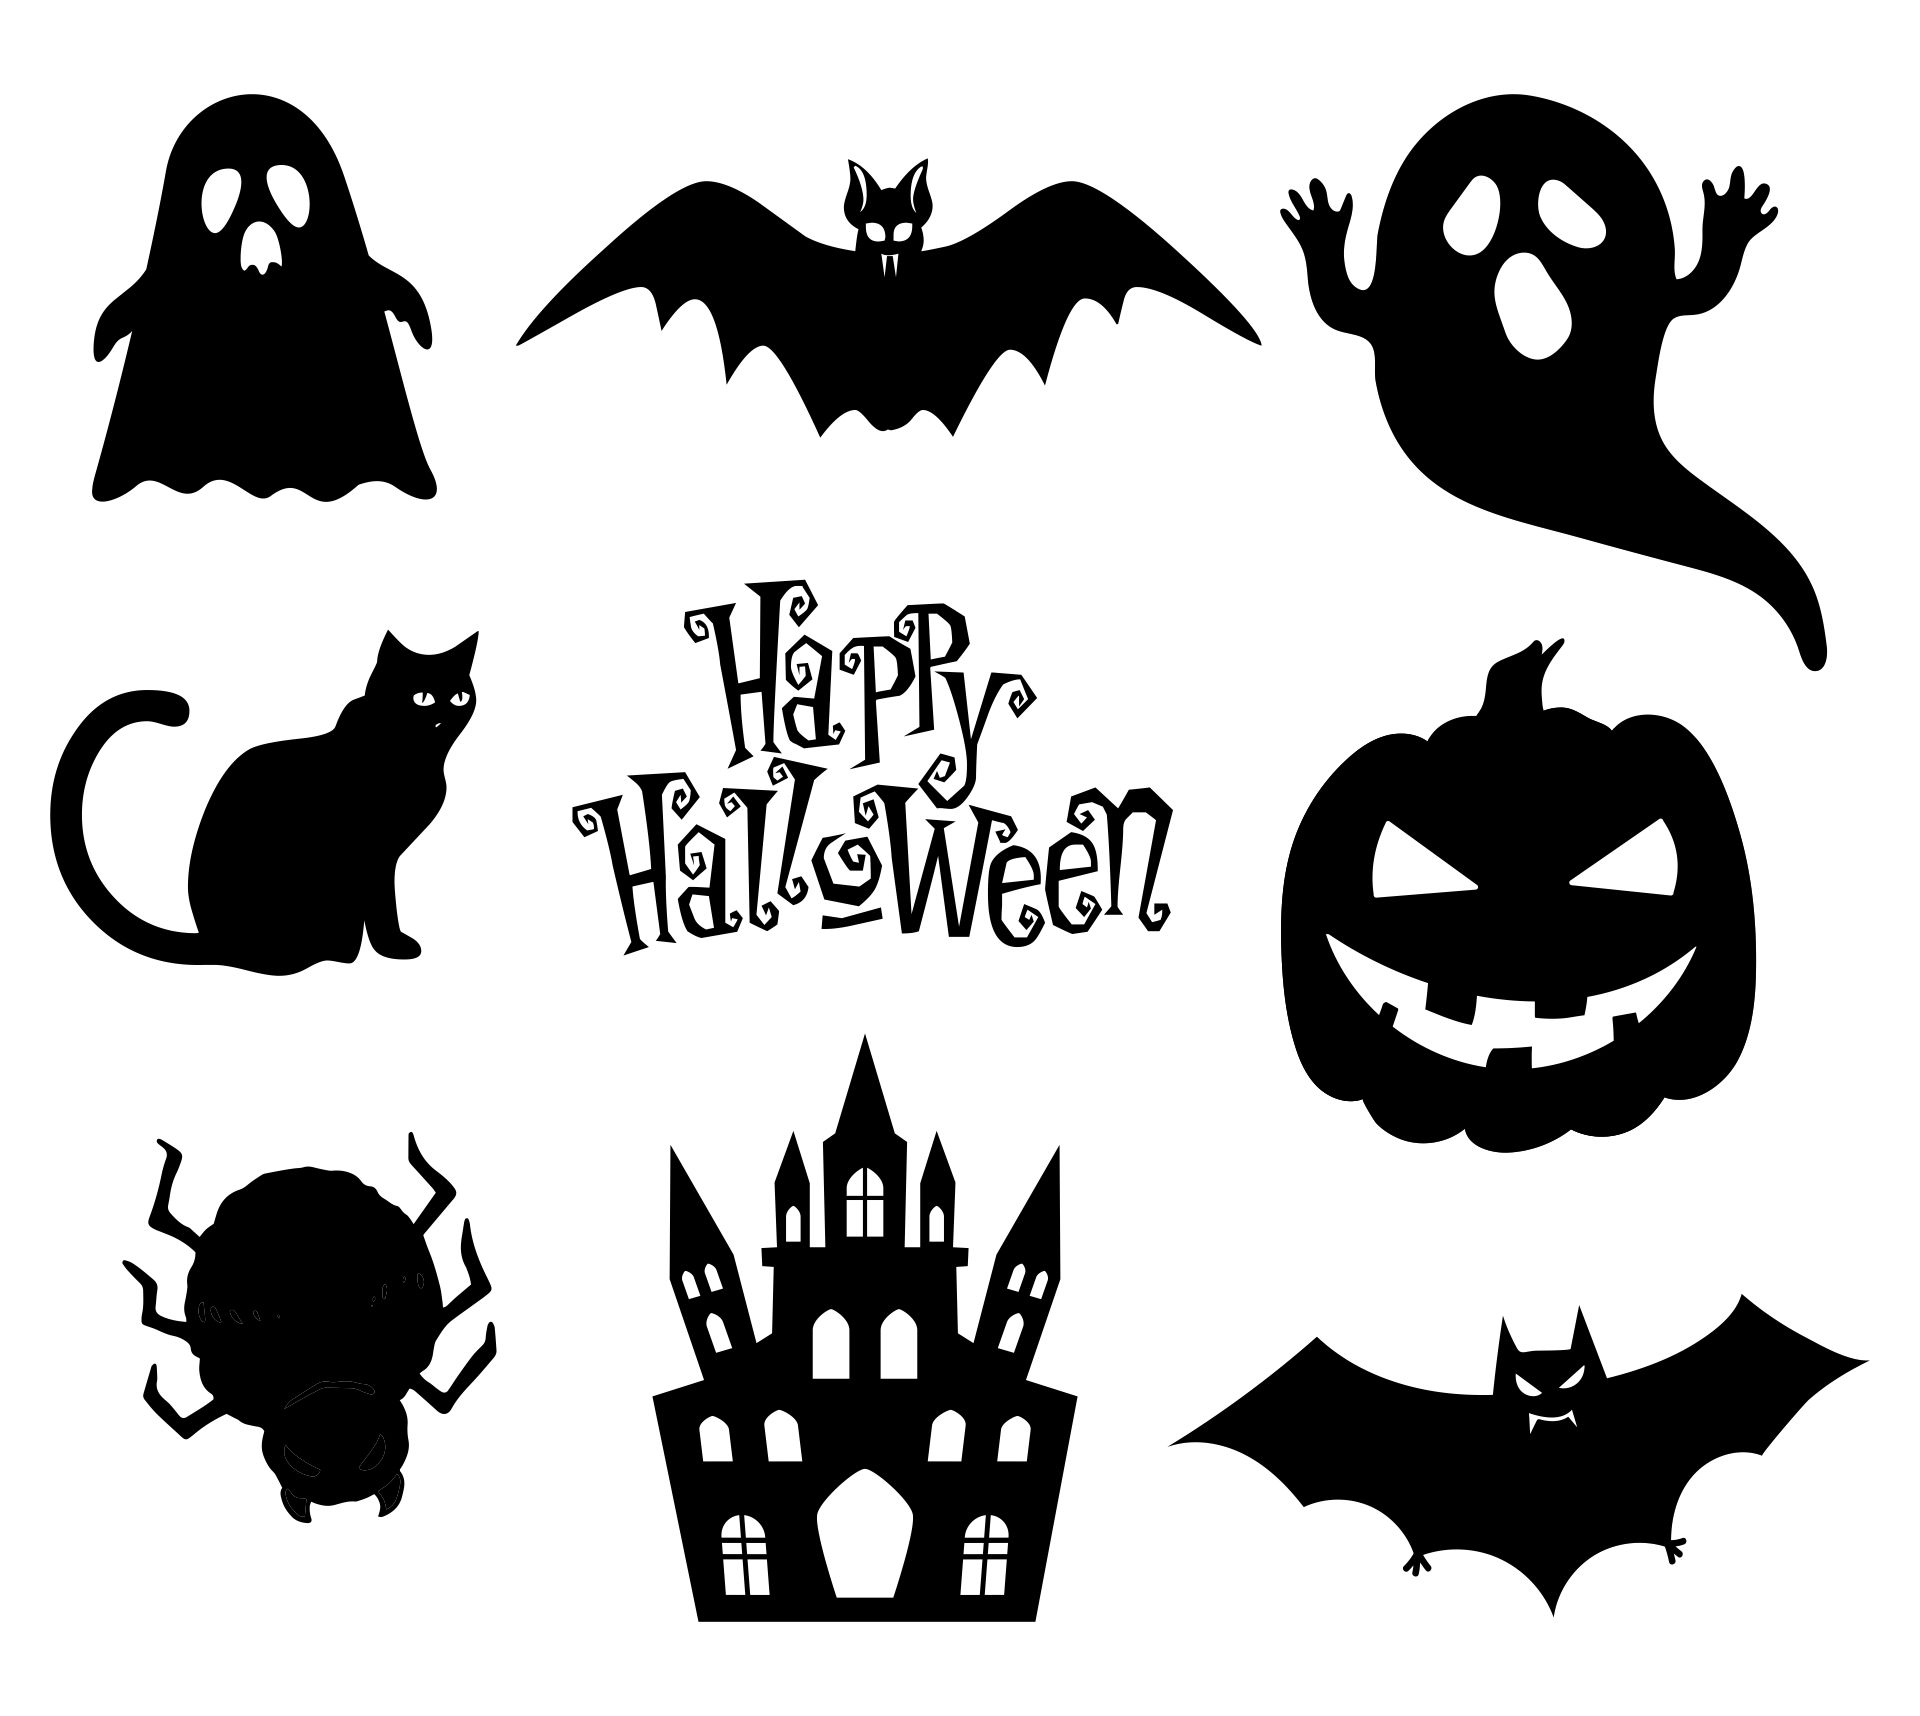 6 Best Images of Printable Halloween Silhouettes Free Halloween